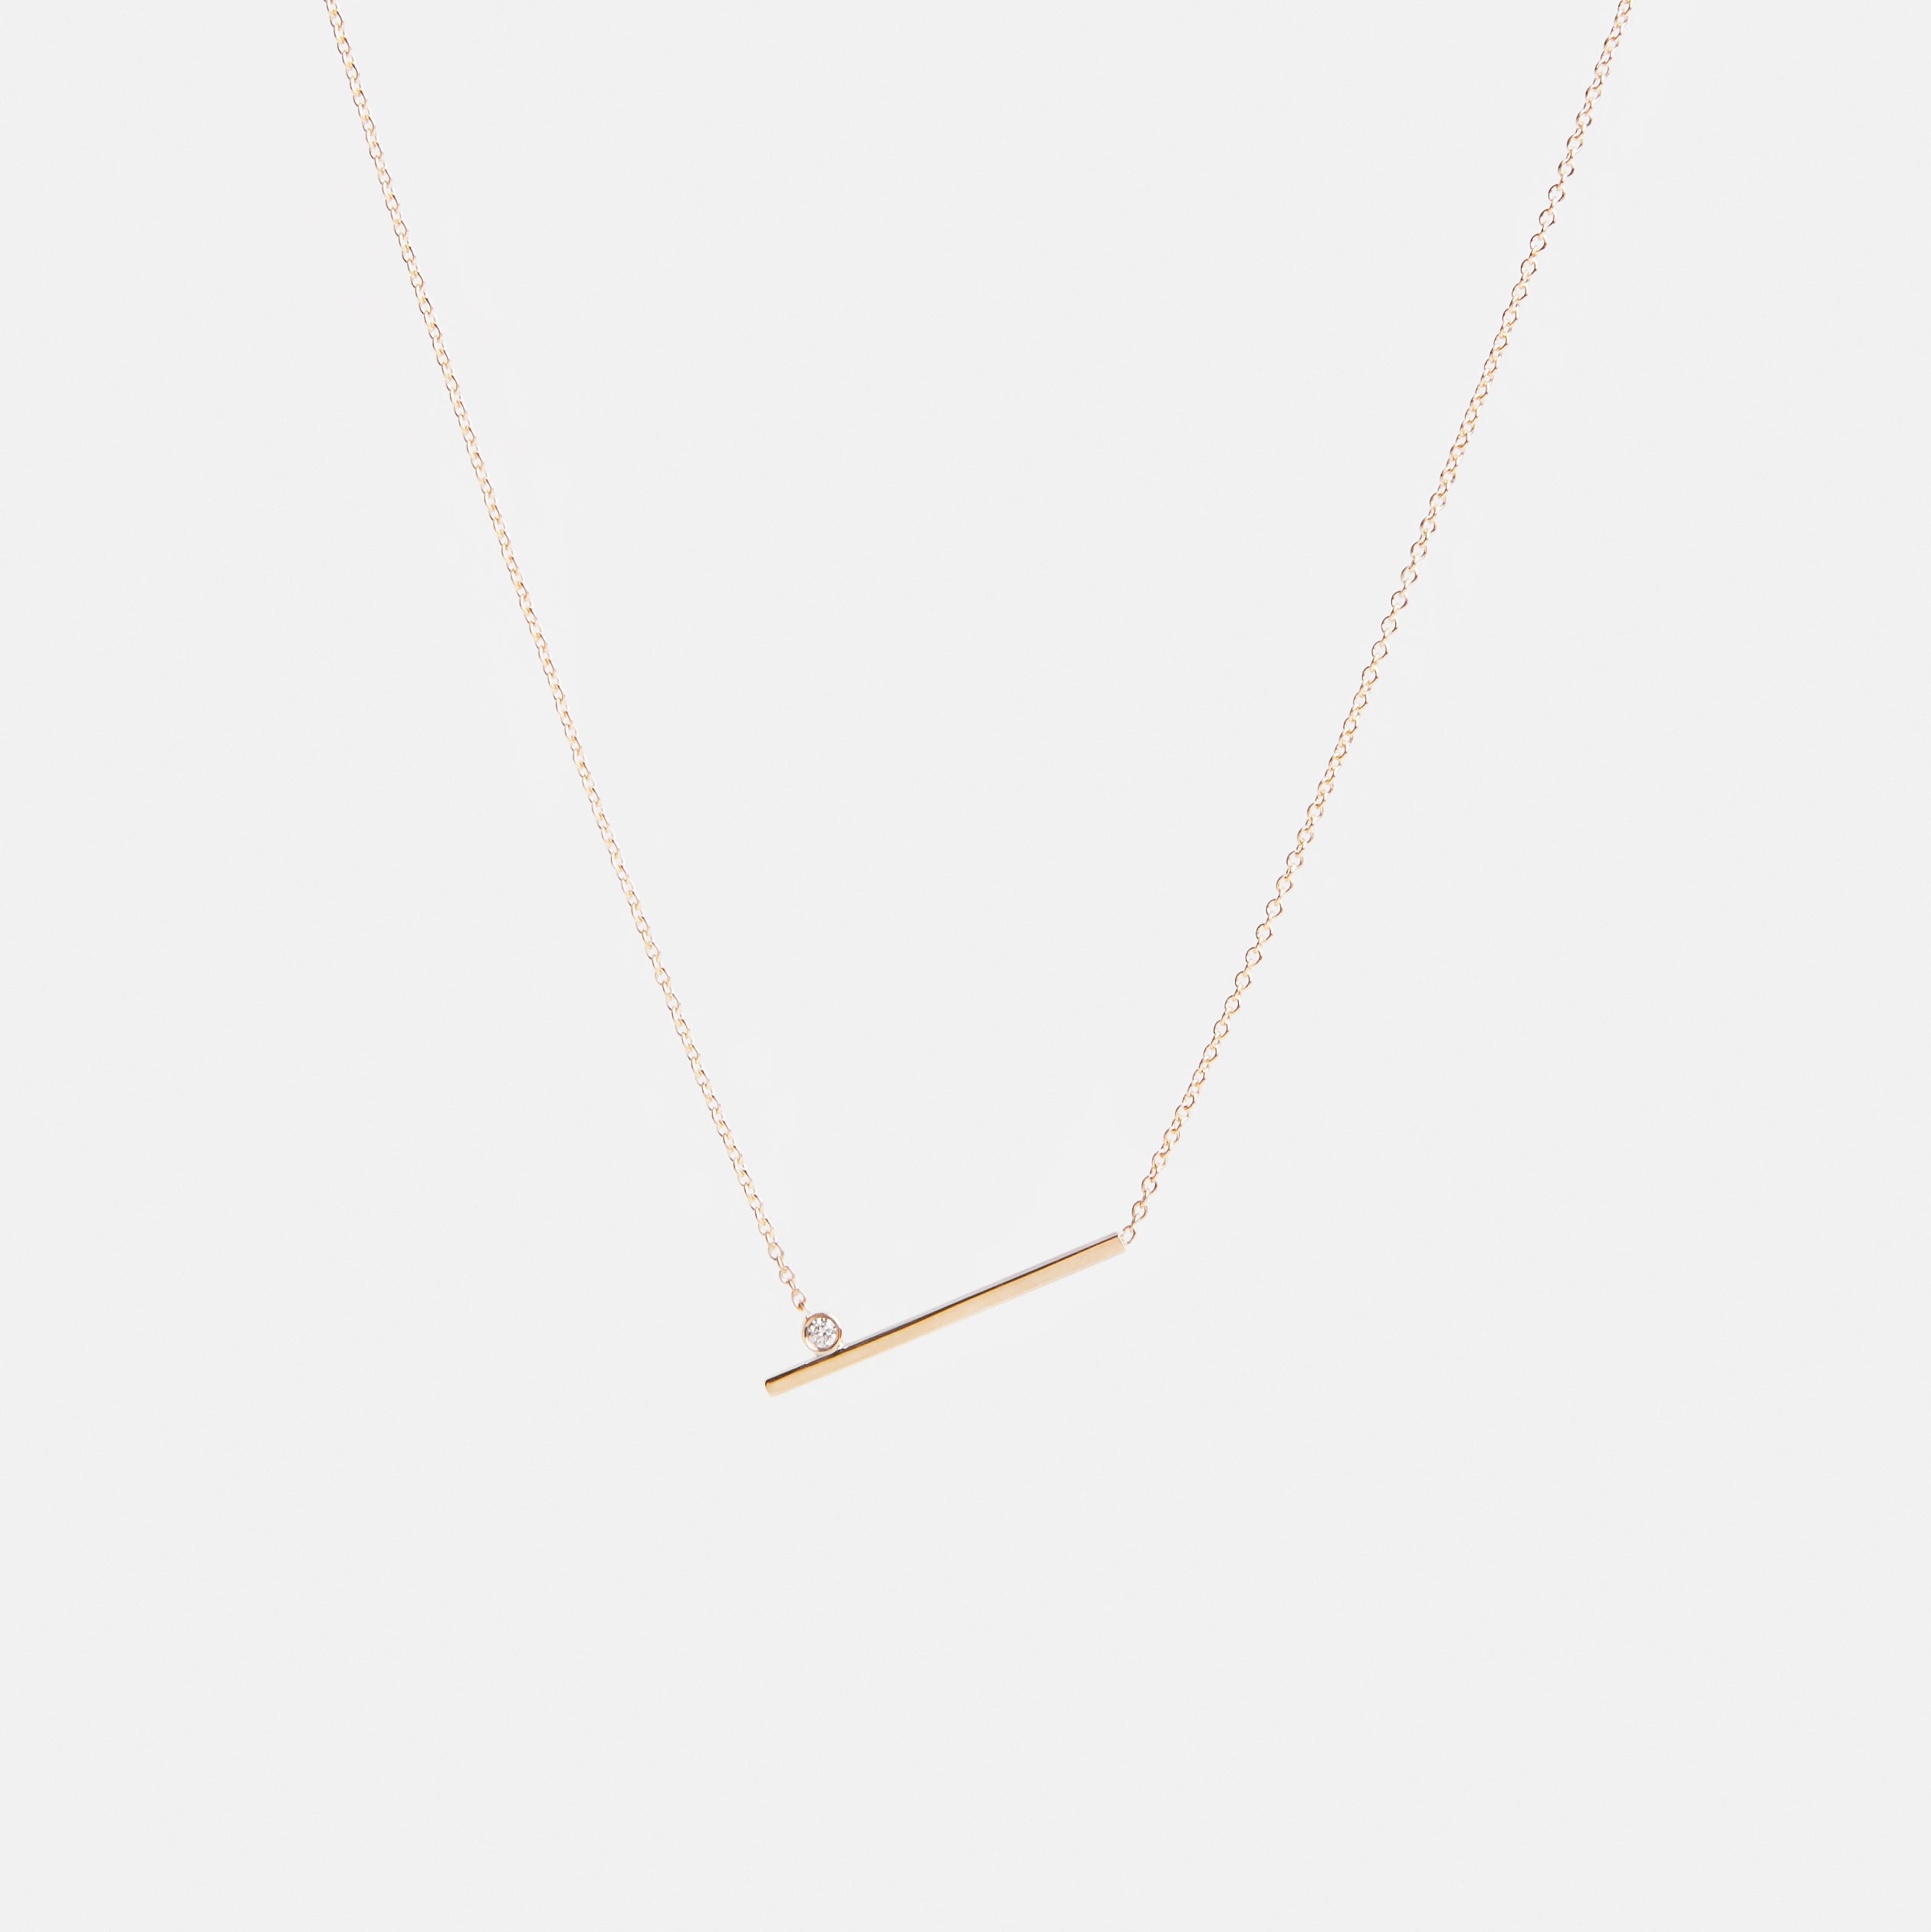 Livi Minimal Necklace in 14k Gold Set with White Diamond By SHW Fine Jewelry NYC